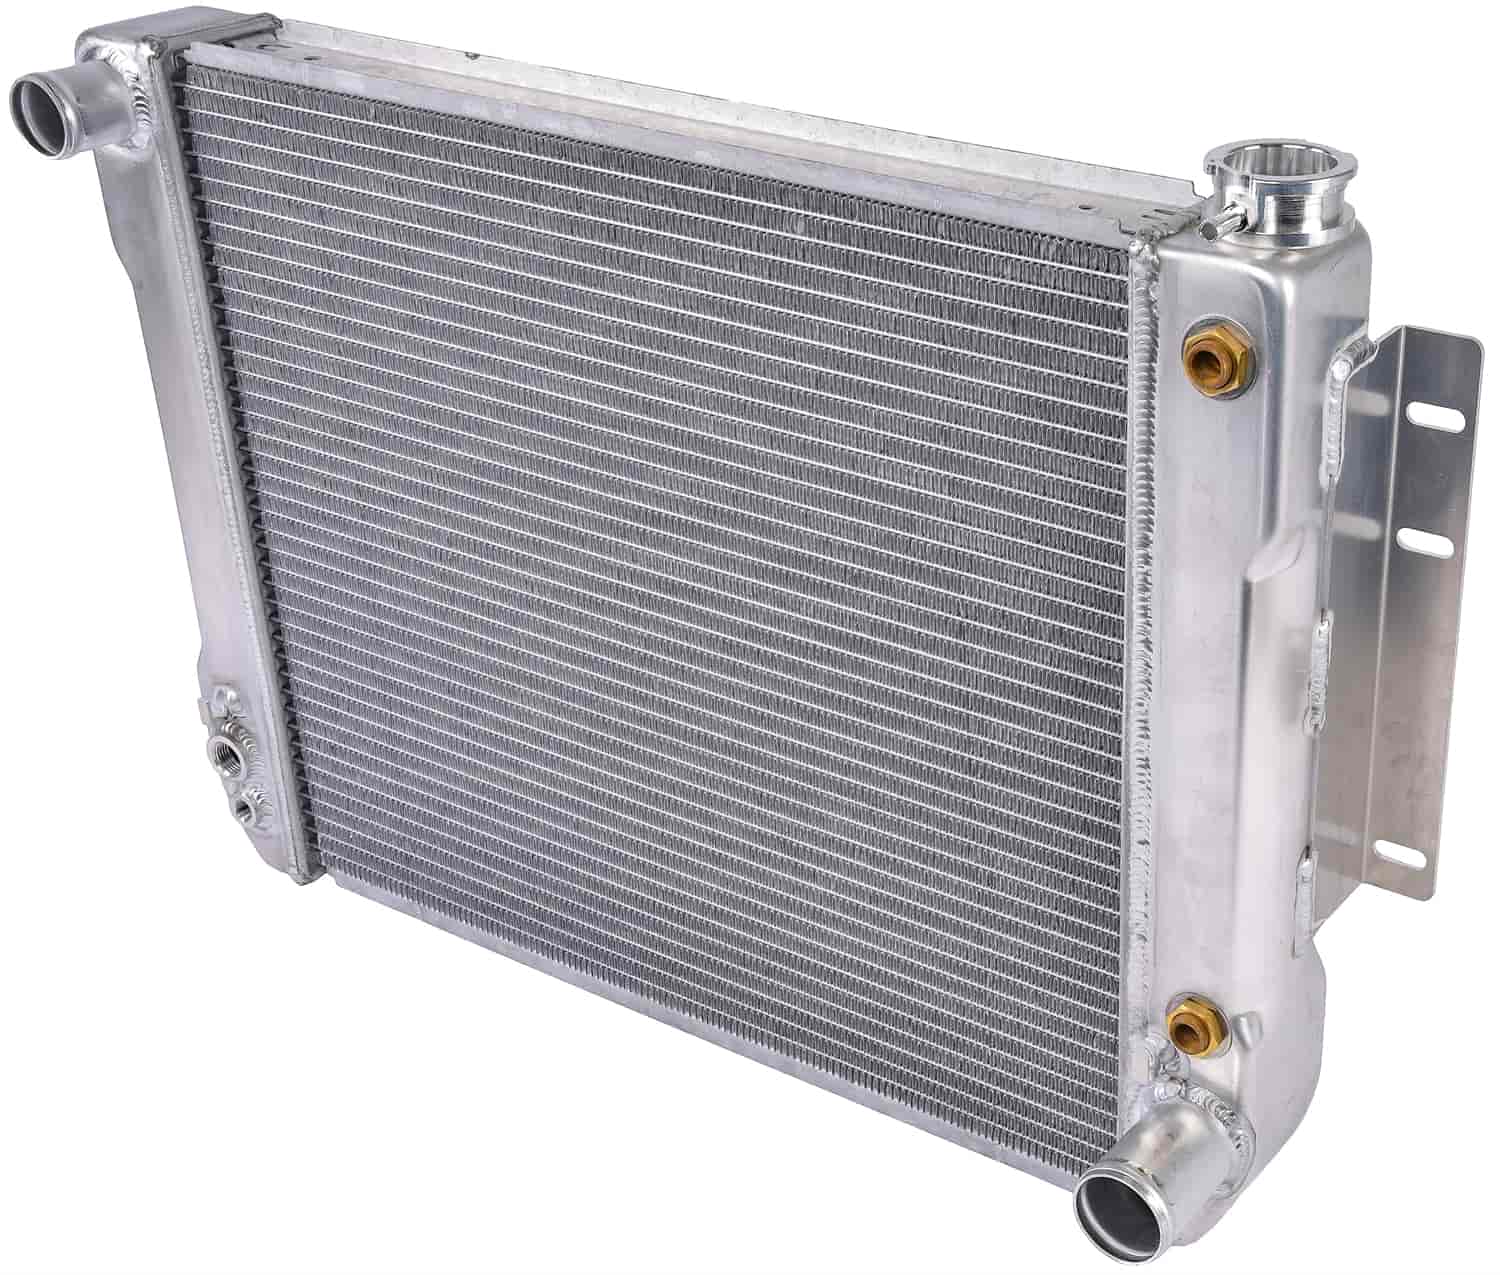 Ready Fit Aluminum Radiator for 1967-1969 Chevrolet Camaro and Pontiac Firebird [Small Block Chevy, Automatic Transmission]